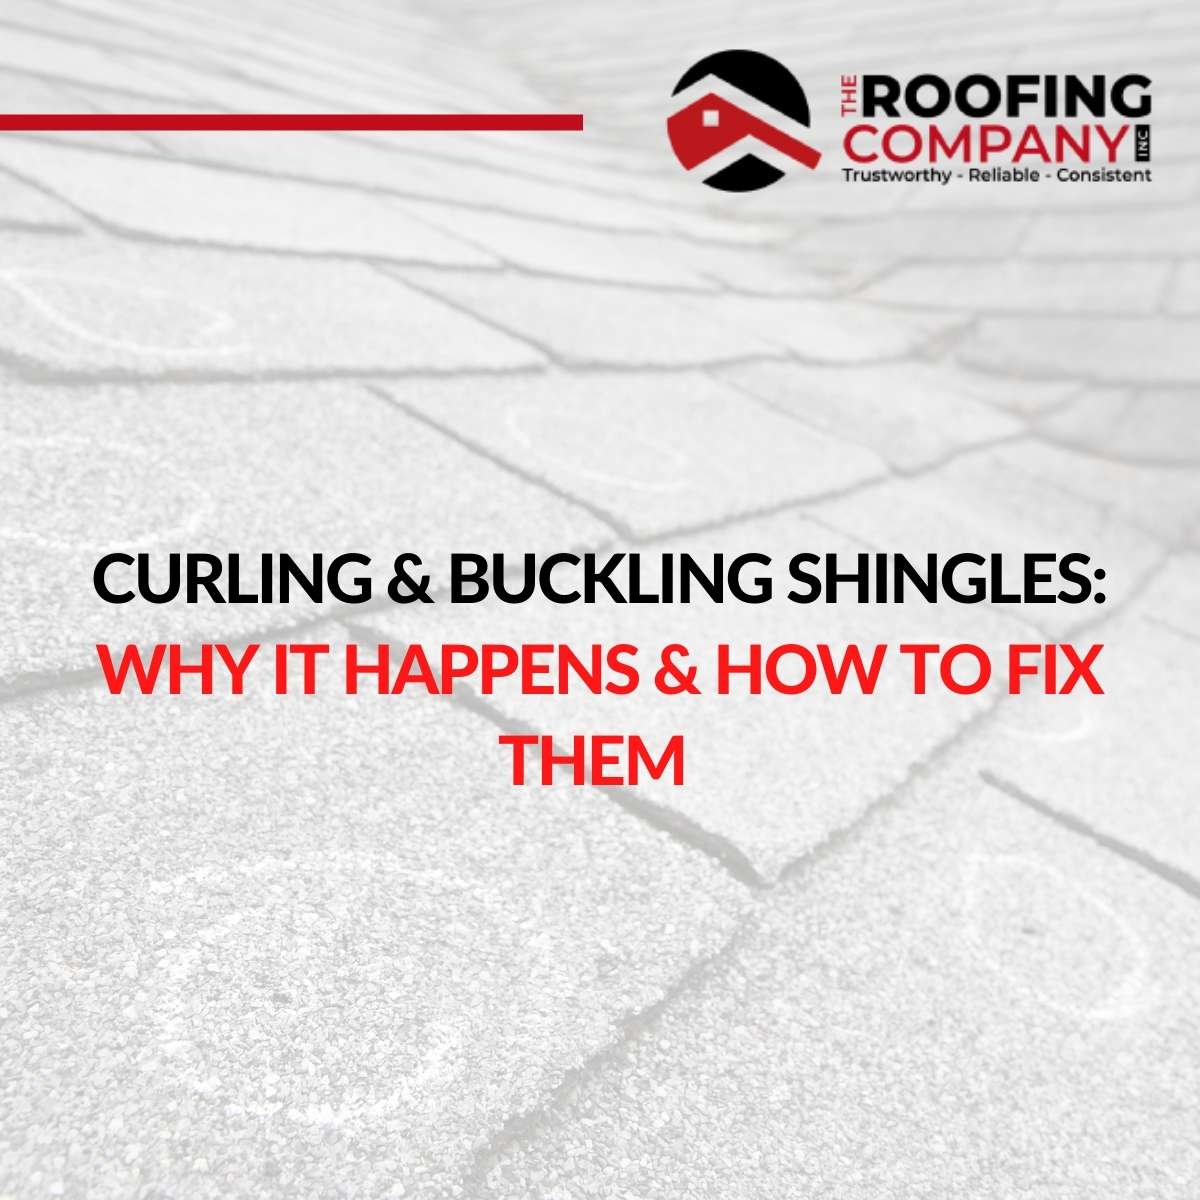 Curling & Buckling Shingles Why It Happens & How To Fix Them